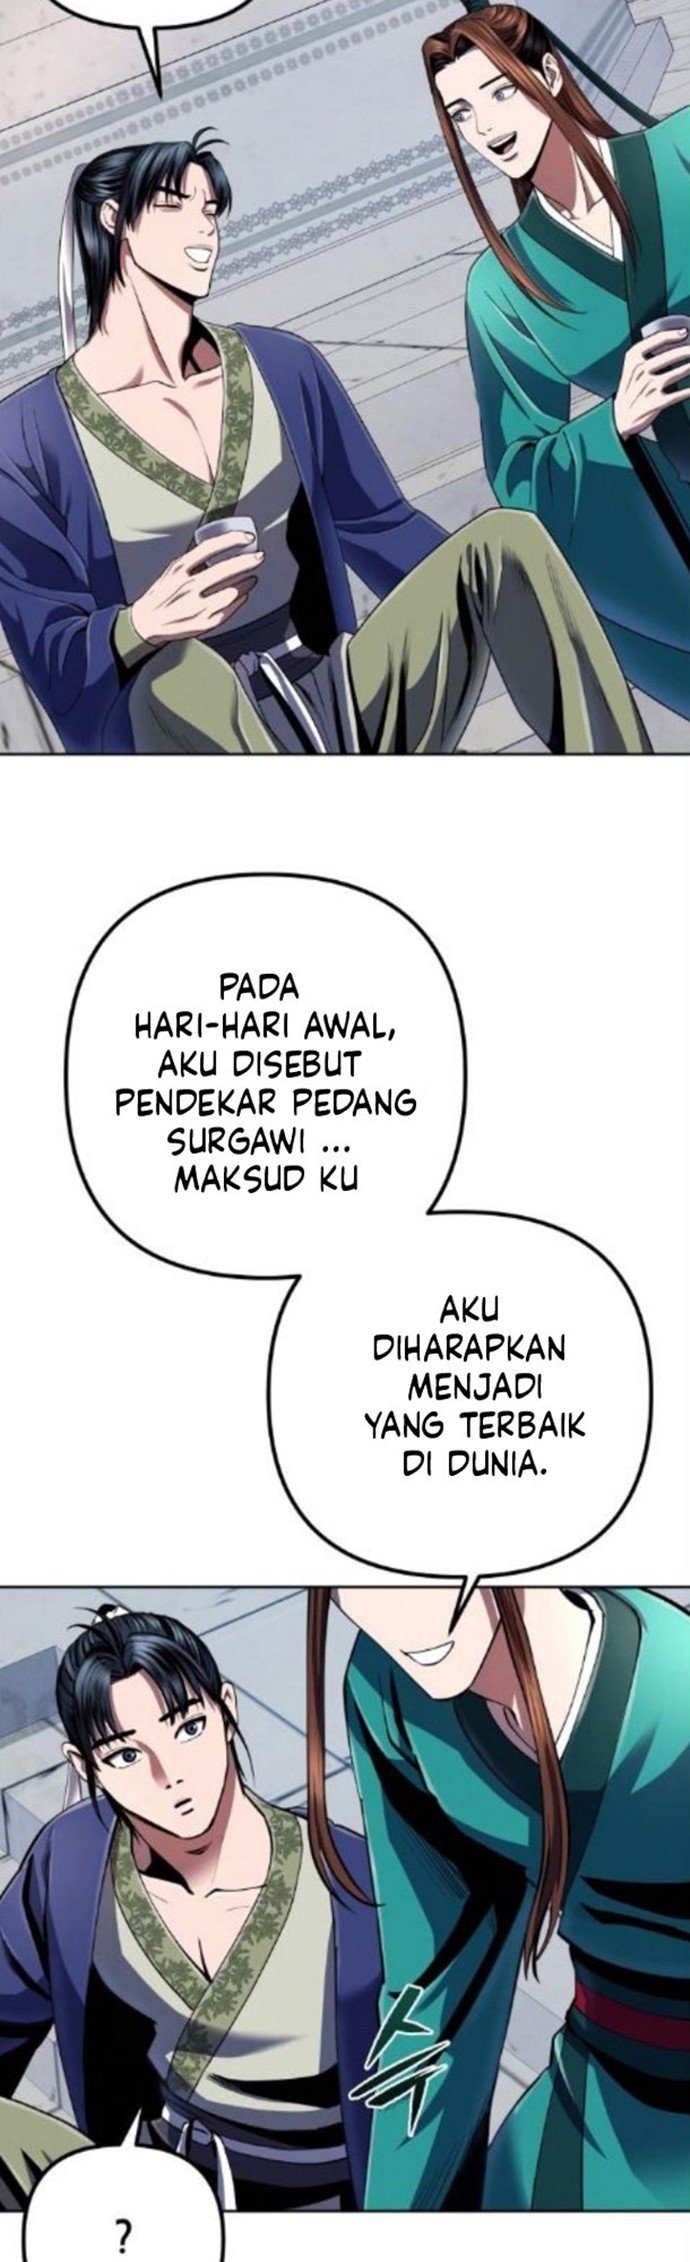 Ha Buk Paeng’s Youngest Son Chapter 33 42